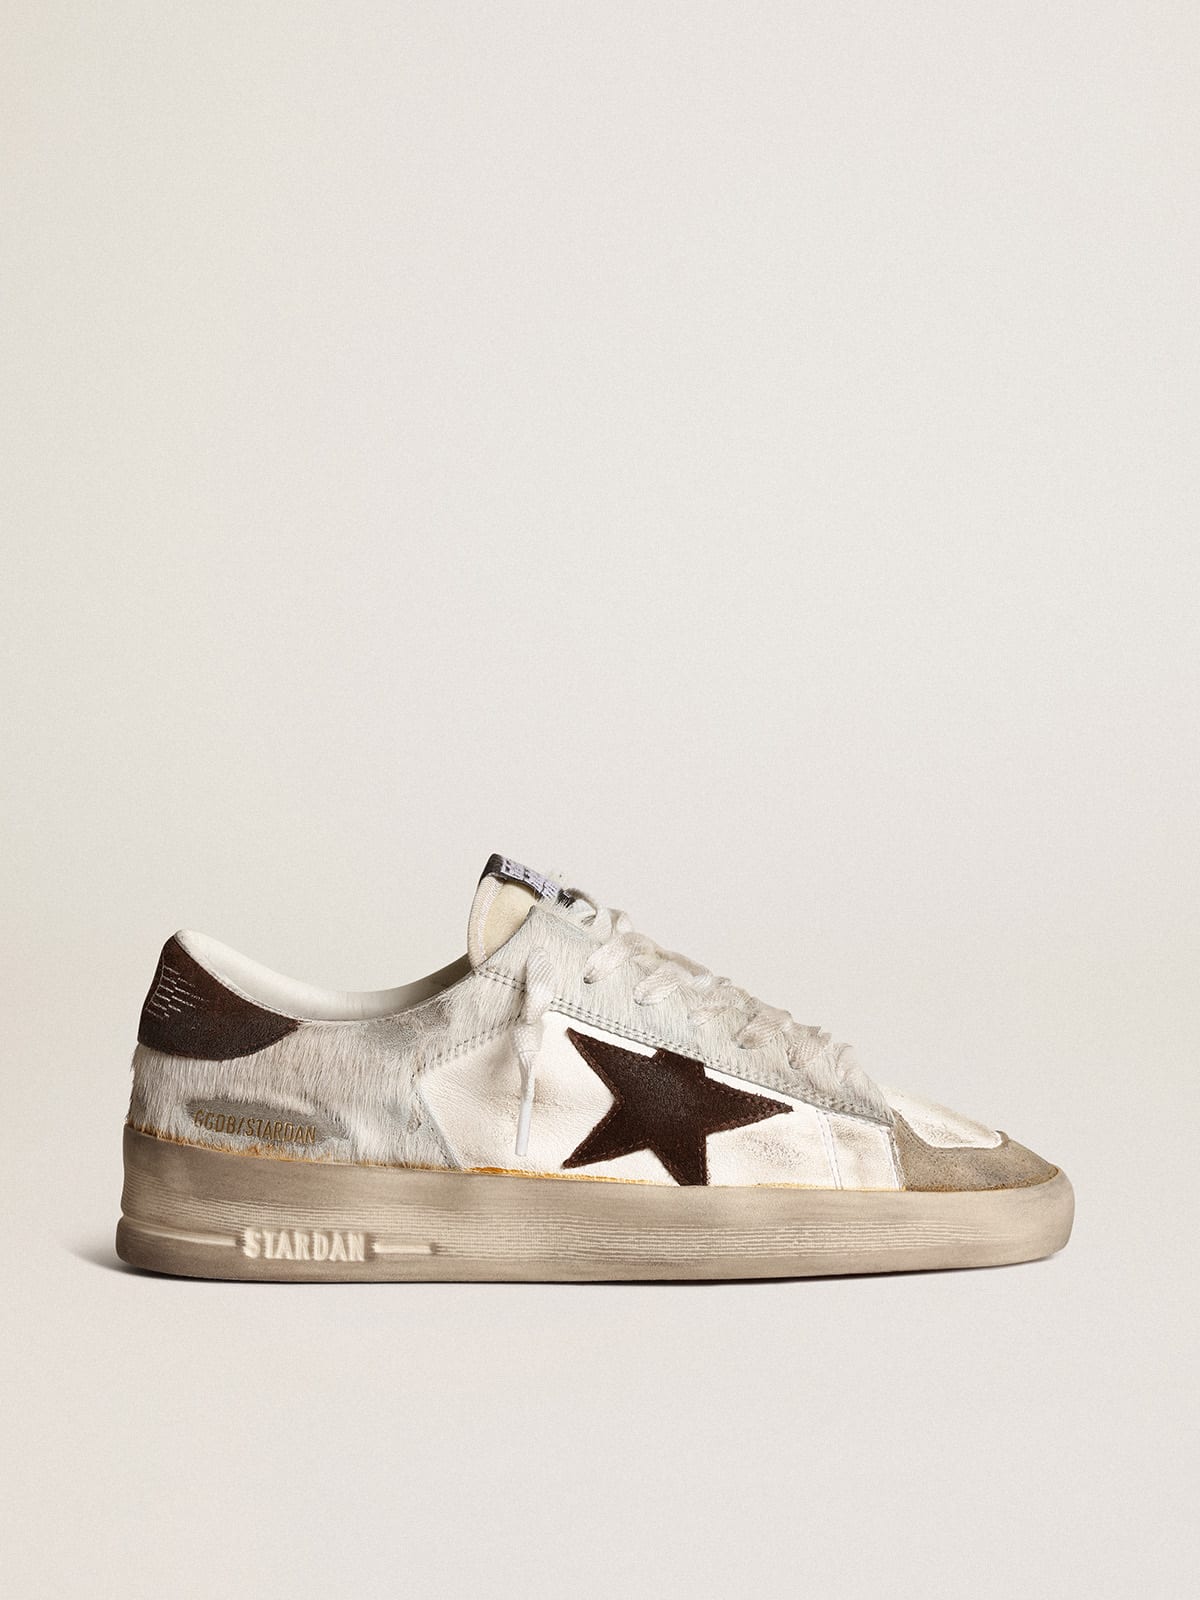 Women's Stardan in nappa and pony skin with brown suede star